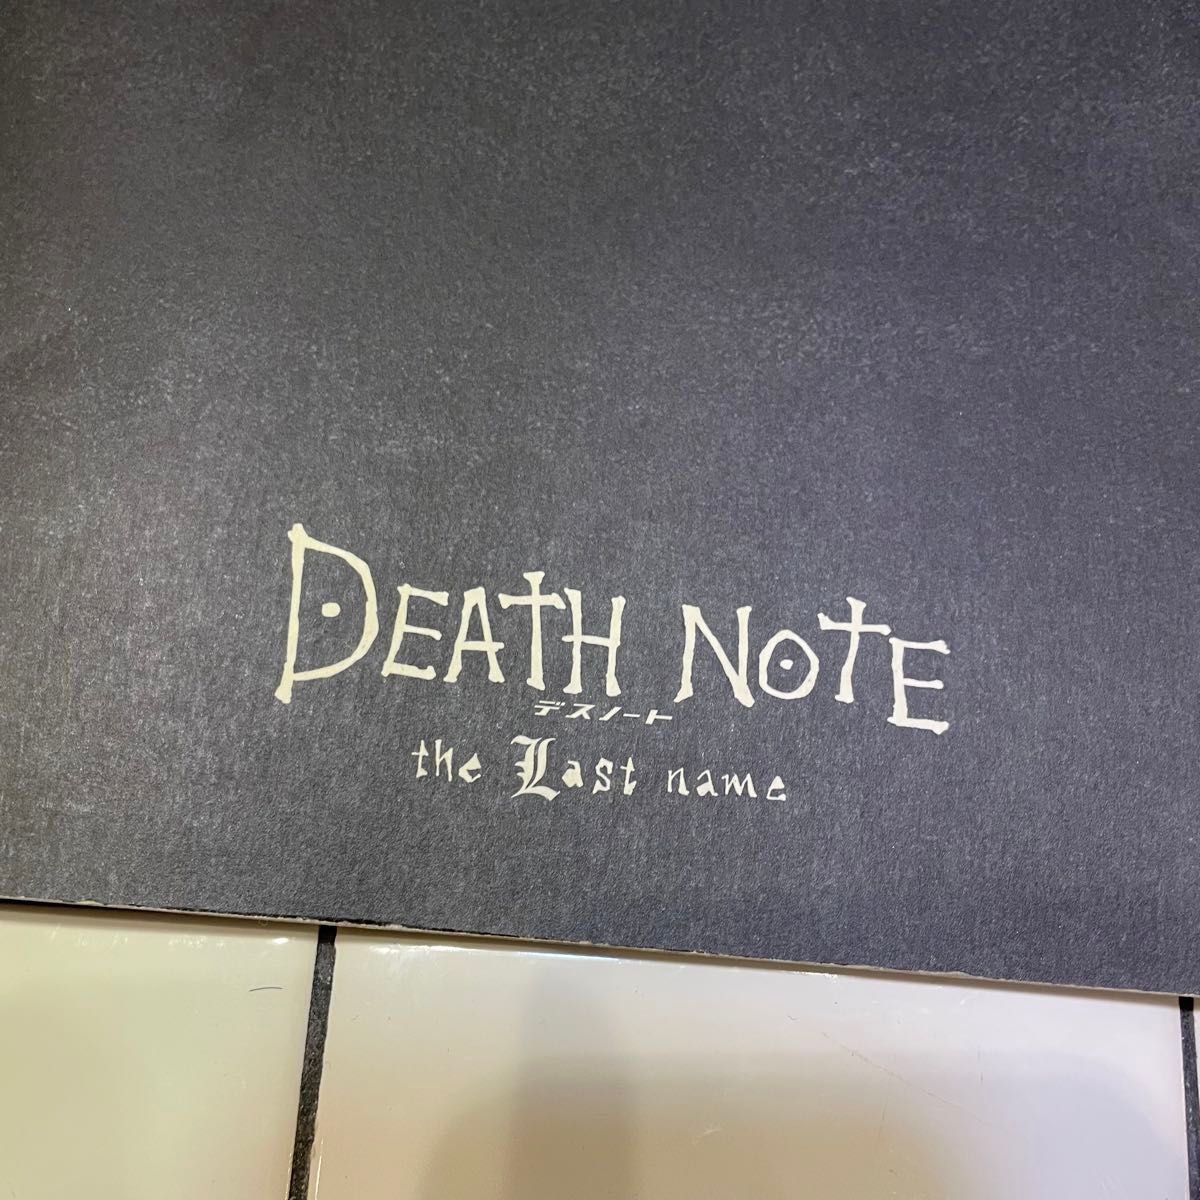 DEATH NOTE the Last name デスノート 映画 パンフレット